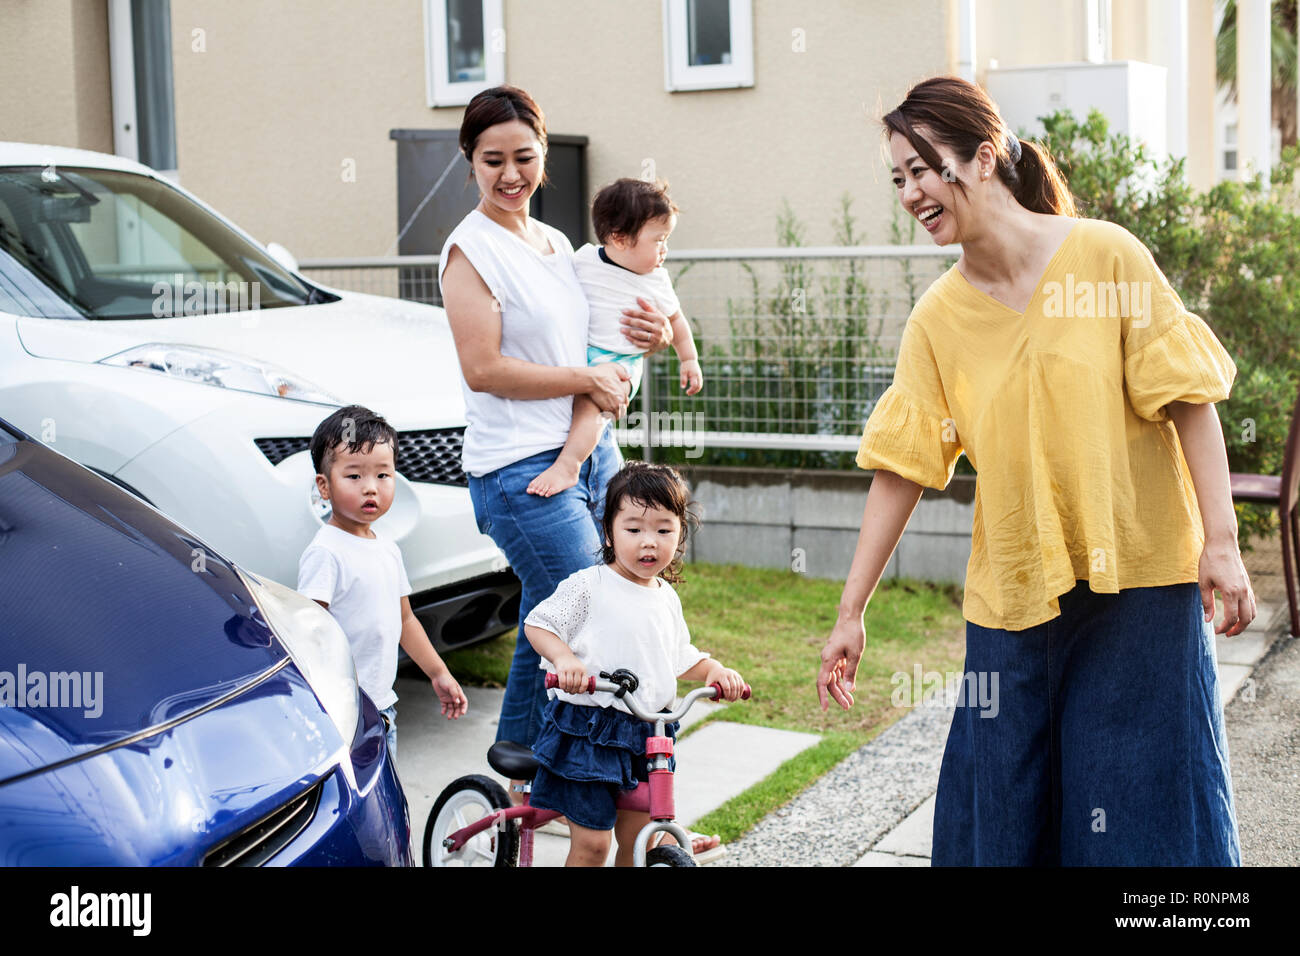 Two smiling Japanese women and three young children standing next to parked car in a street. Stock Photo